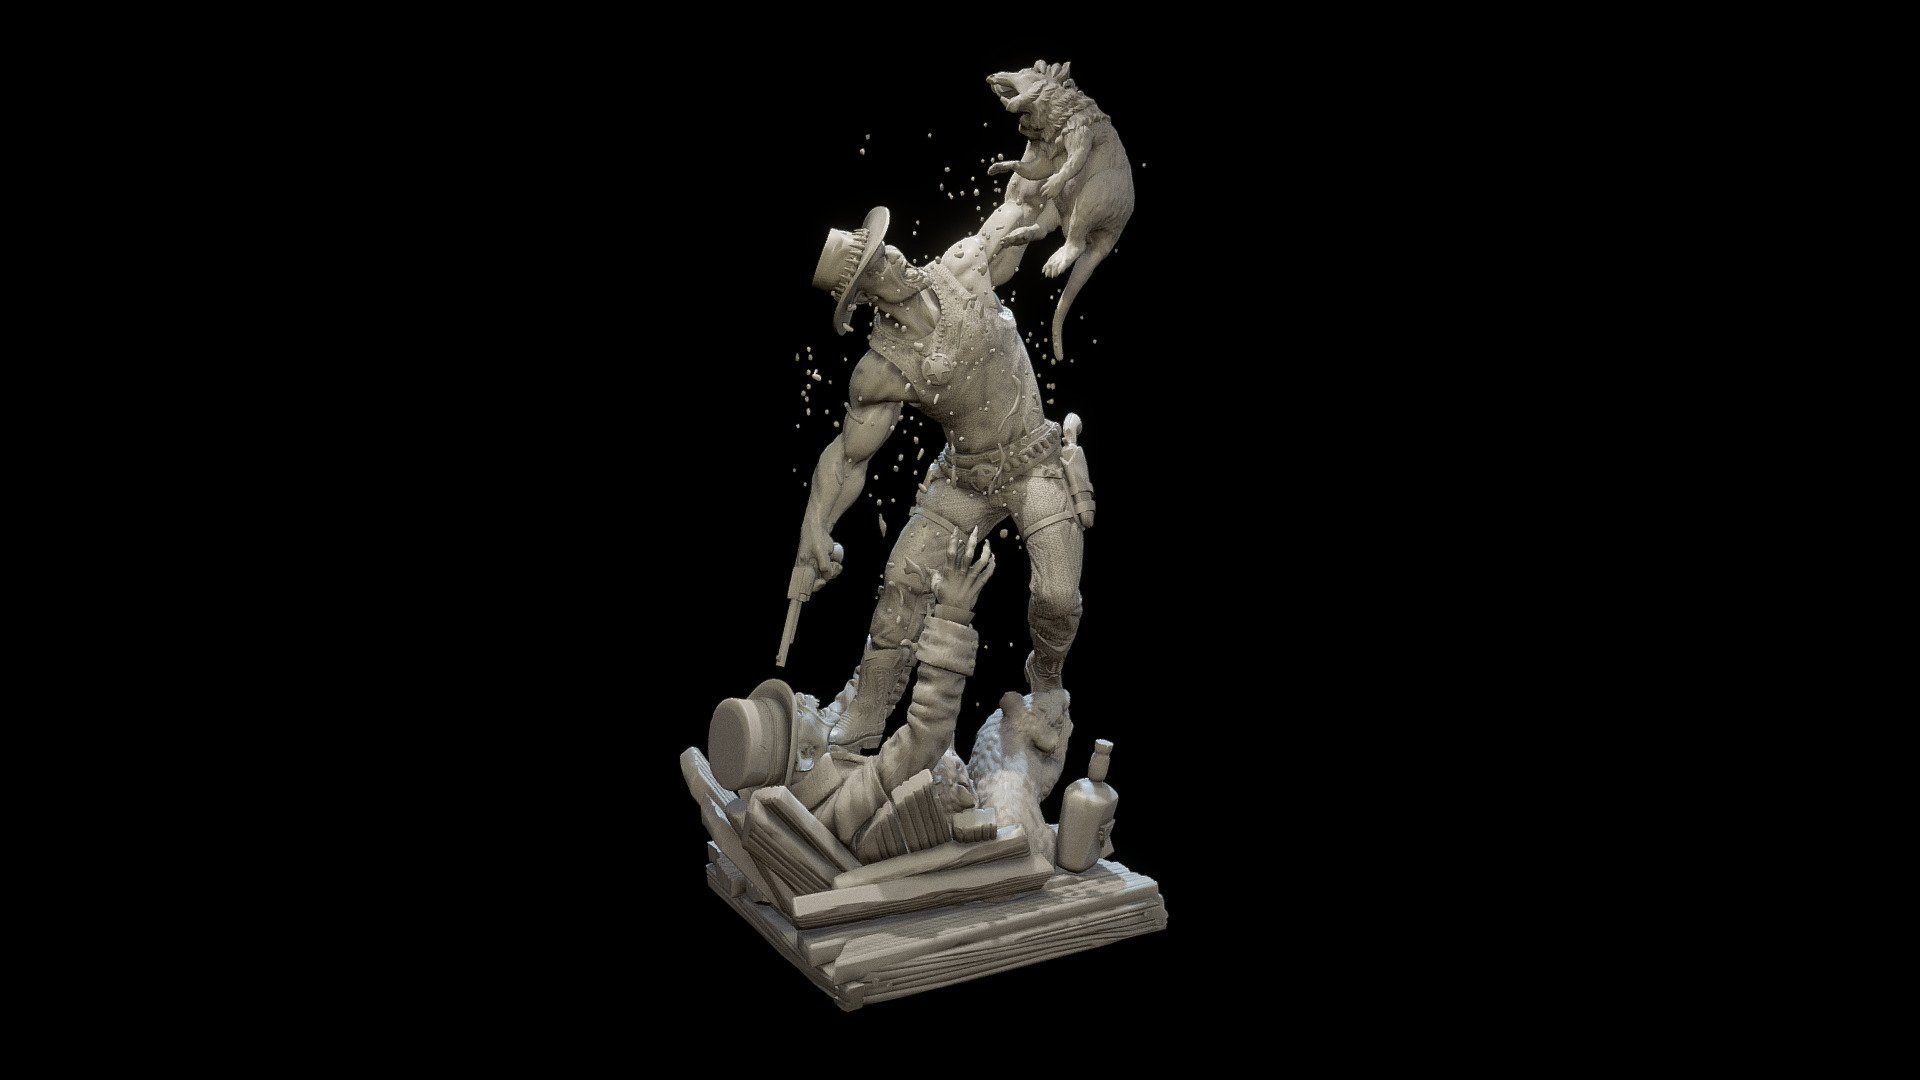 200mm sculpture for resin casting based on characters from the webcomic High Moon, by Ellis and Gallaher 3d model